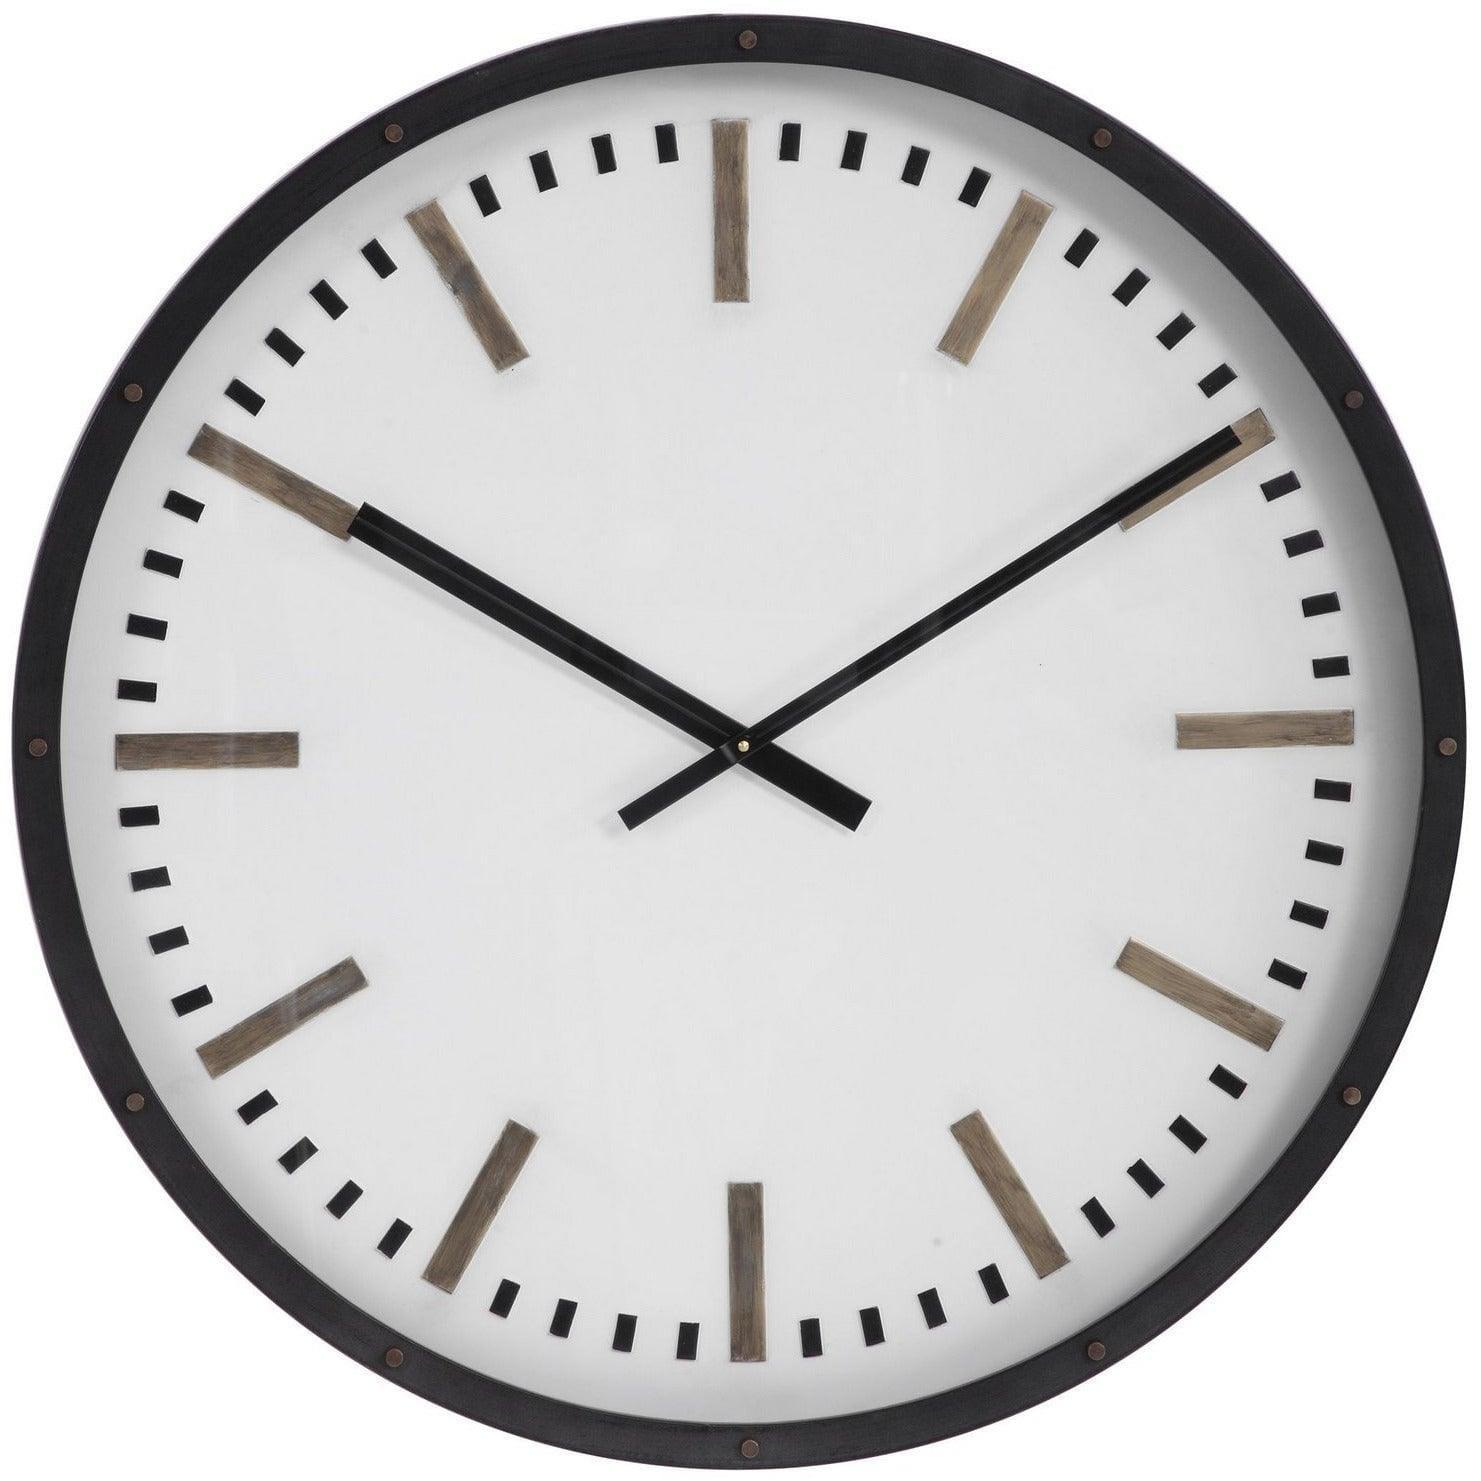 The Uttermost - Fleming Wall Clock - 06103 | Montreal Lighting & Hardware